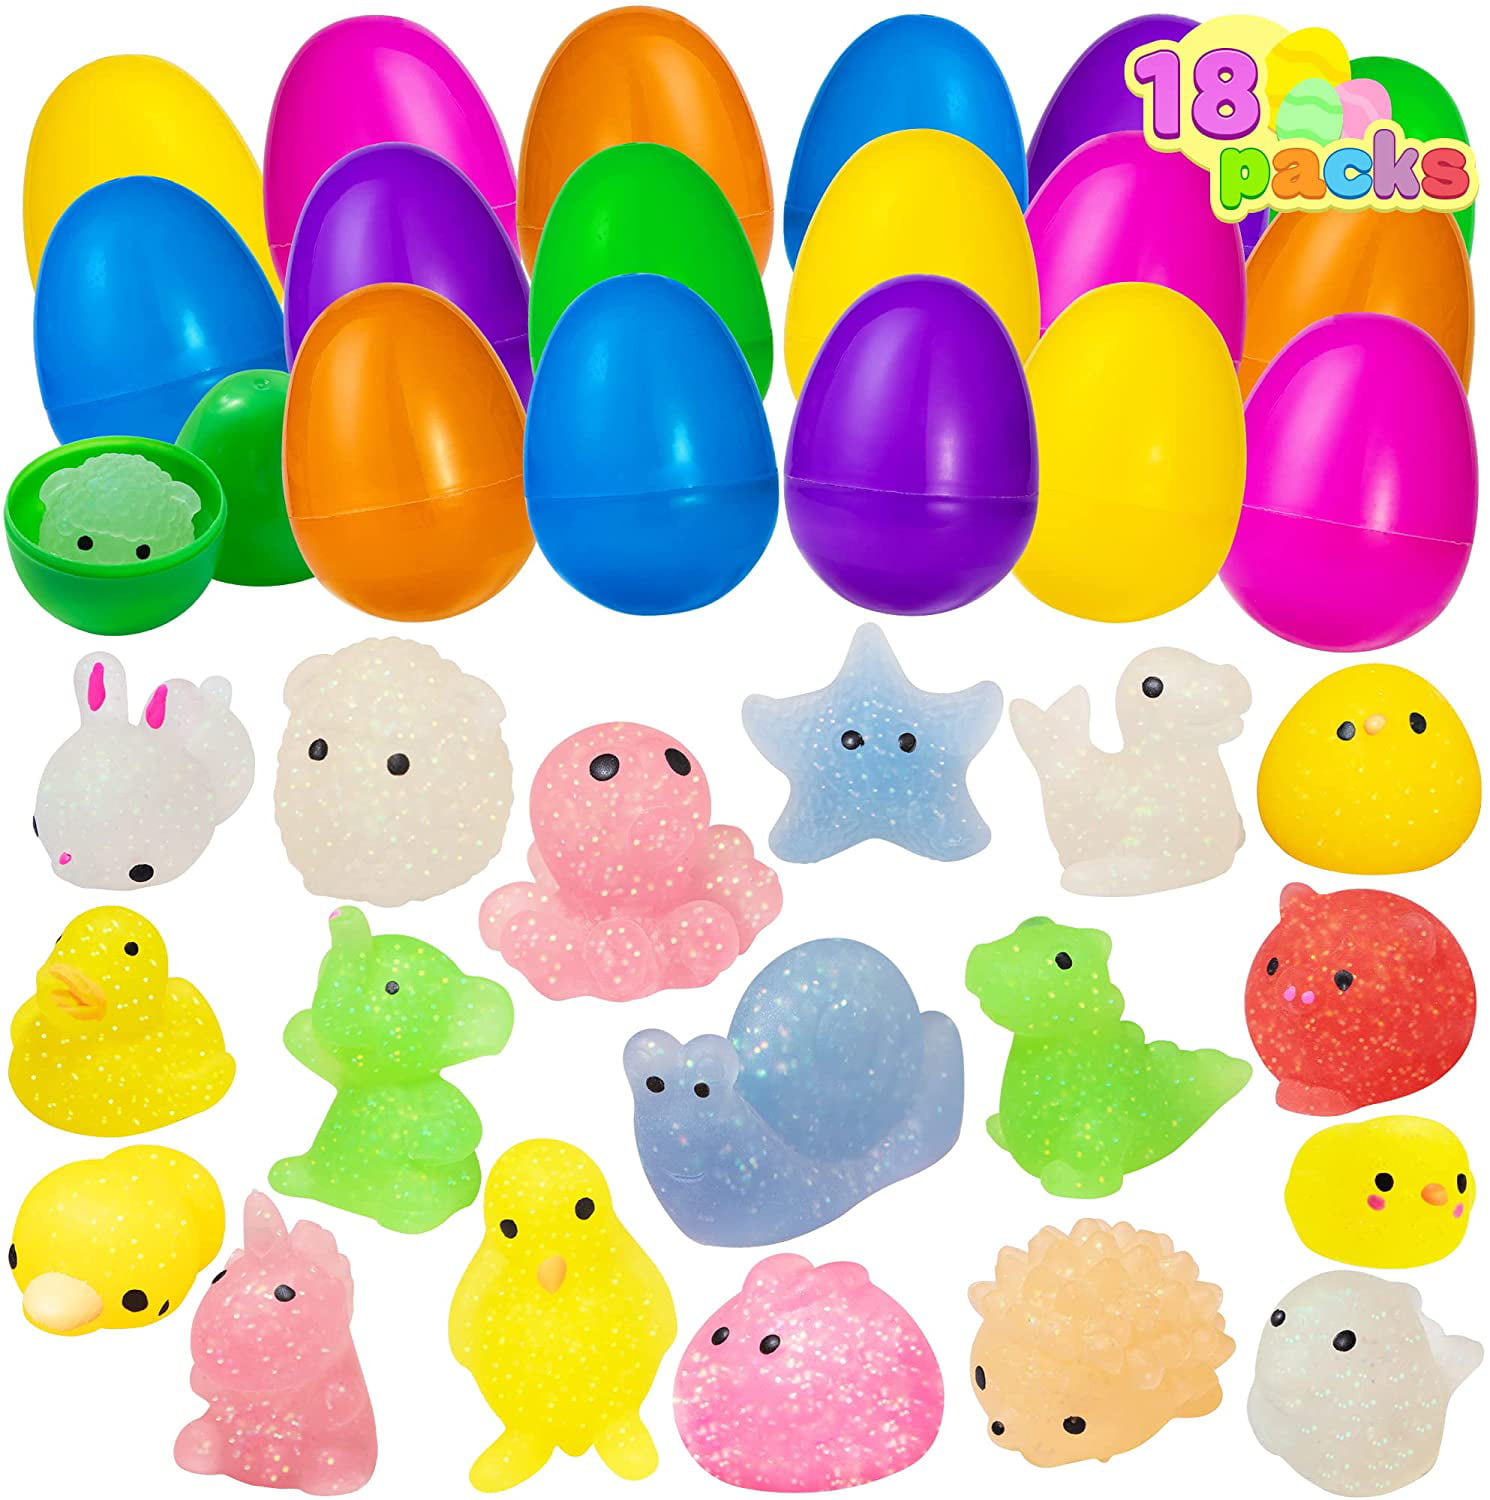 10 Pcs Easter Squishies Toys Easter Egg Hunt Basket Stuffer Fillers for Adults Easter Theme Party Favor Stress Relief Anxiety Toy Includes 8 Pcs Easter Egg Stress Ball and 2 Pcs Kawaii Easter Rabbit 